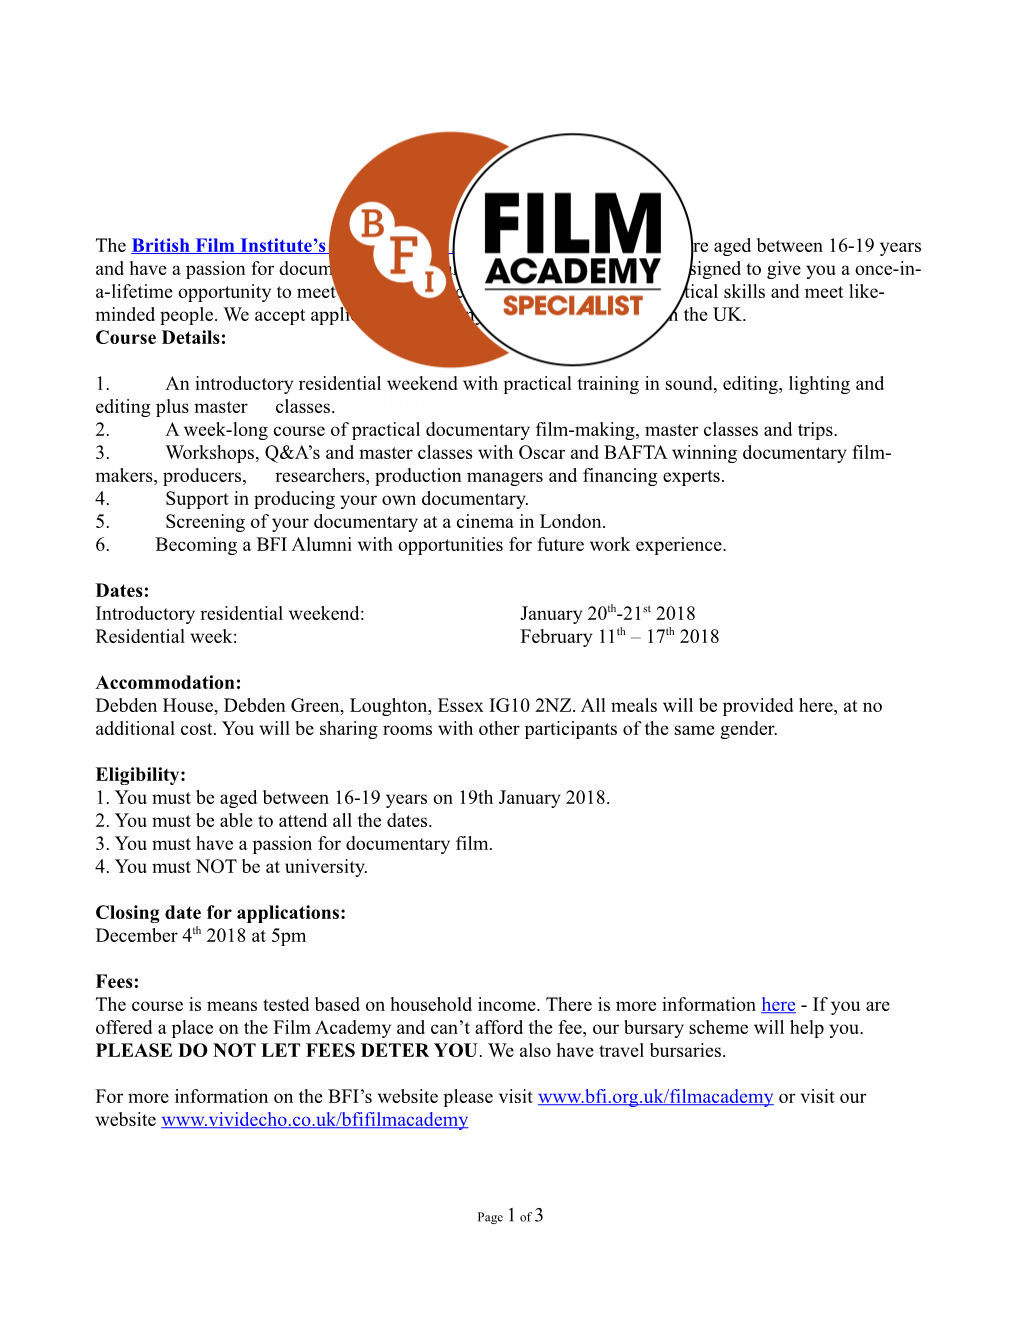 2.A Week-Long Course of Practical Documentary Film-Making, Master Classes and Trips